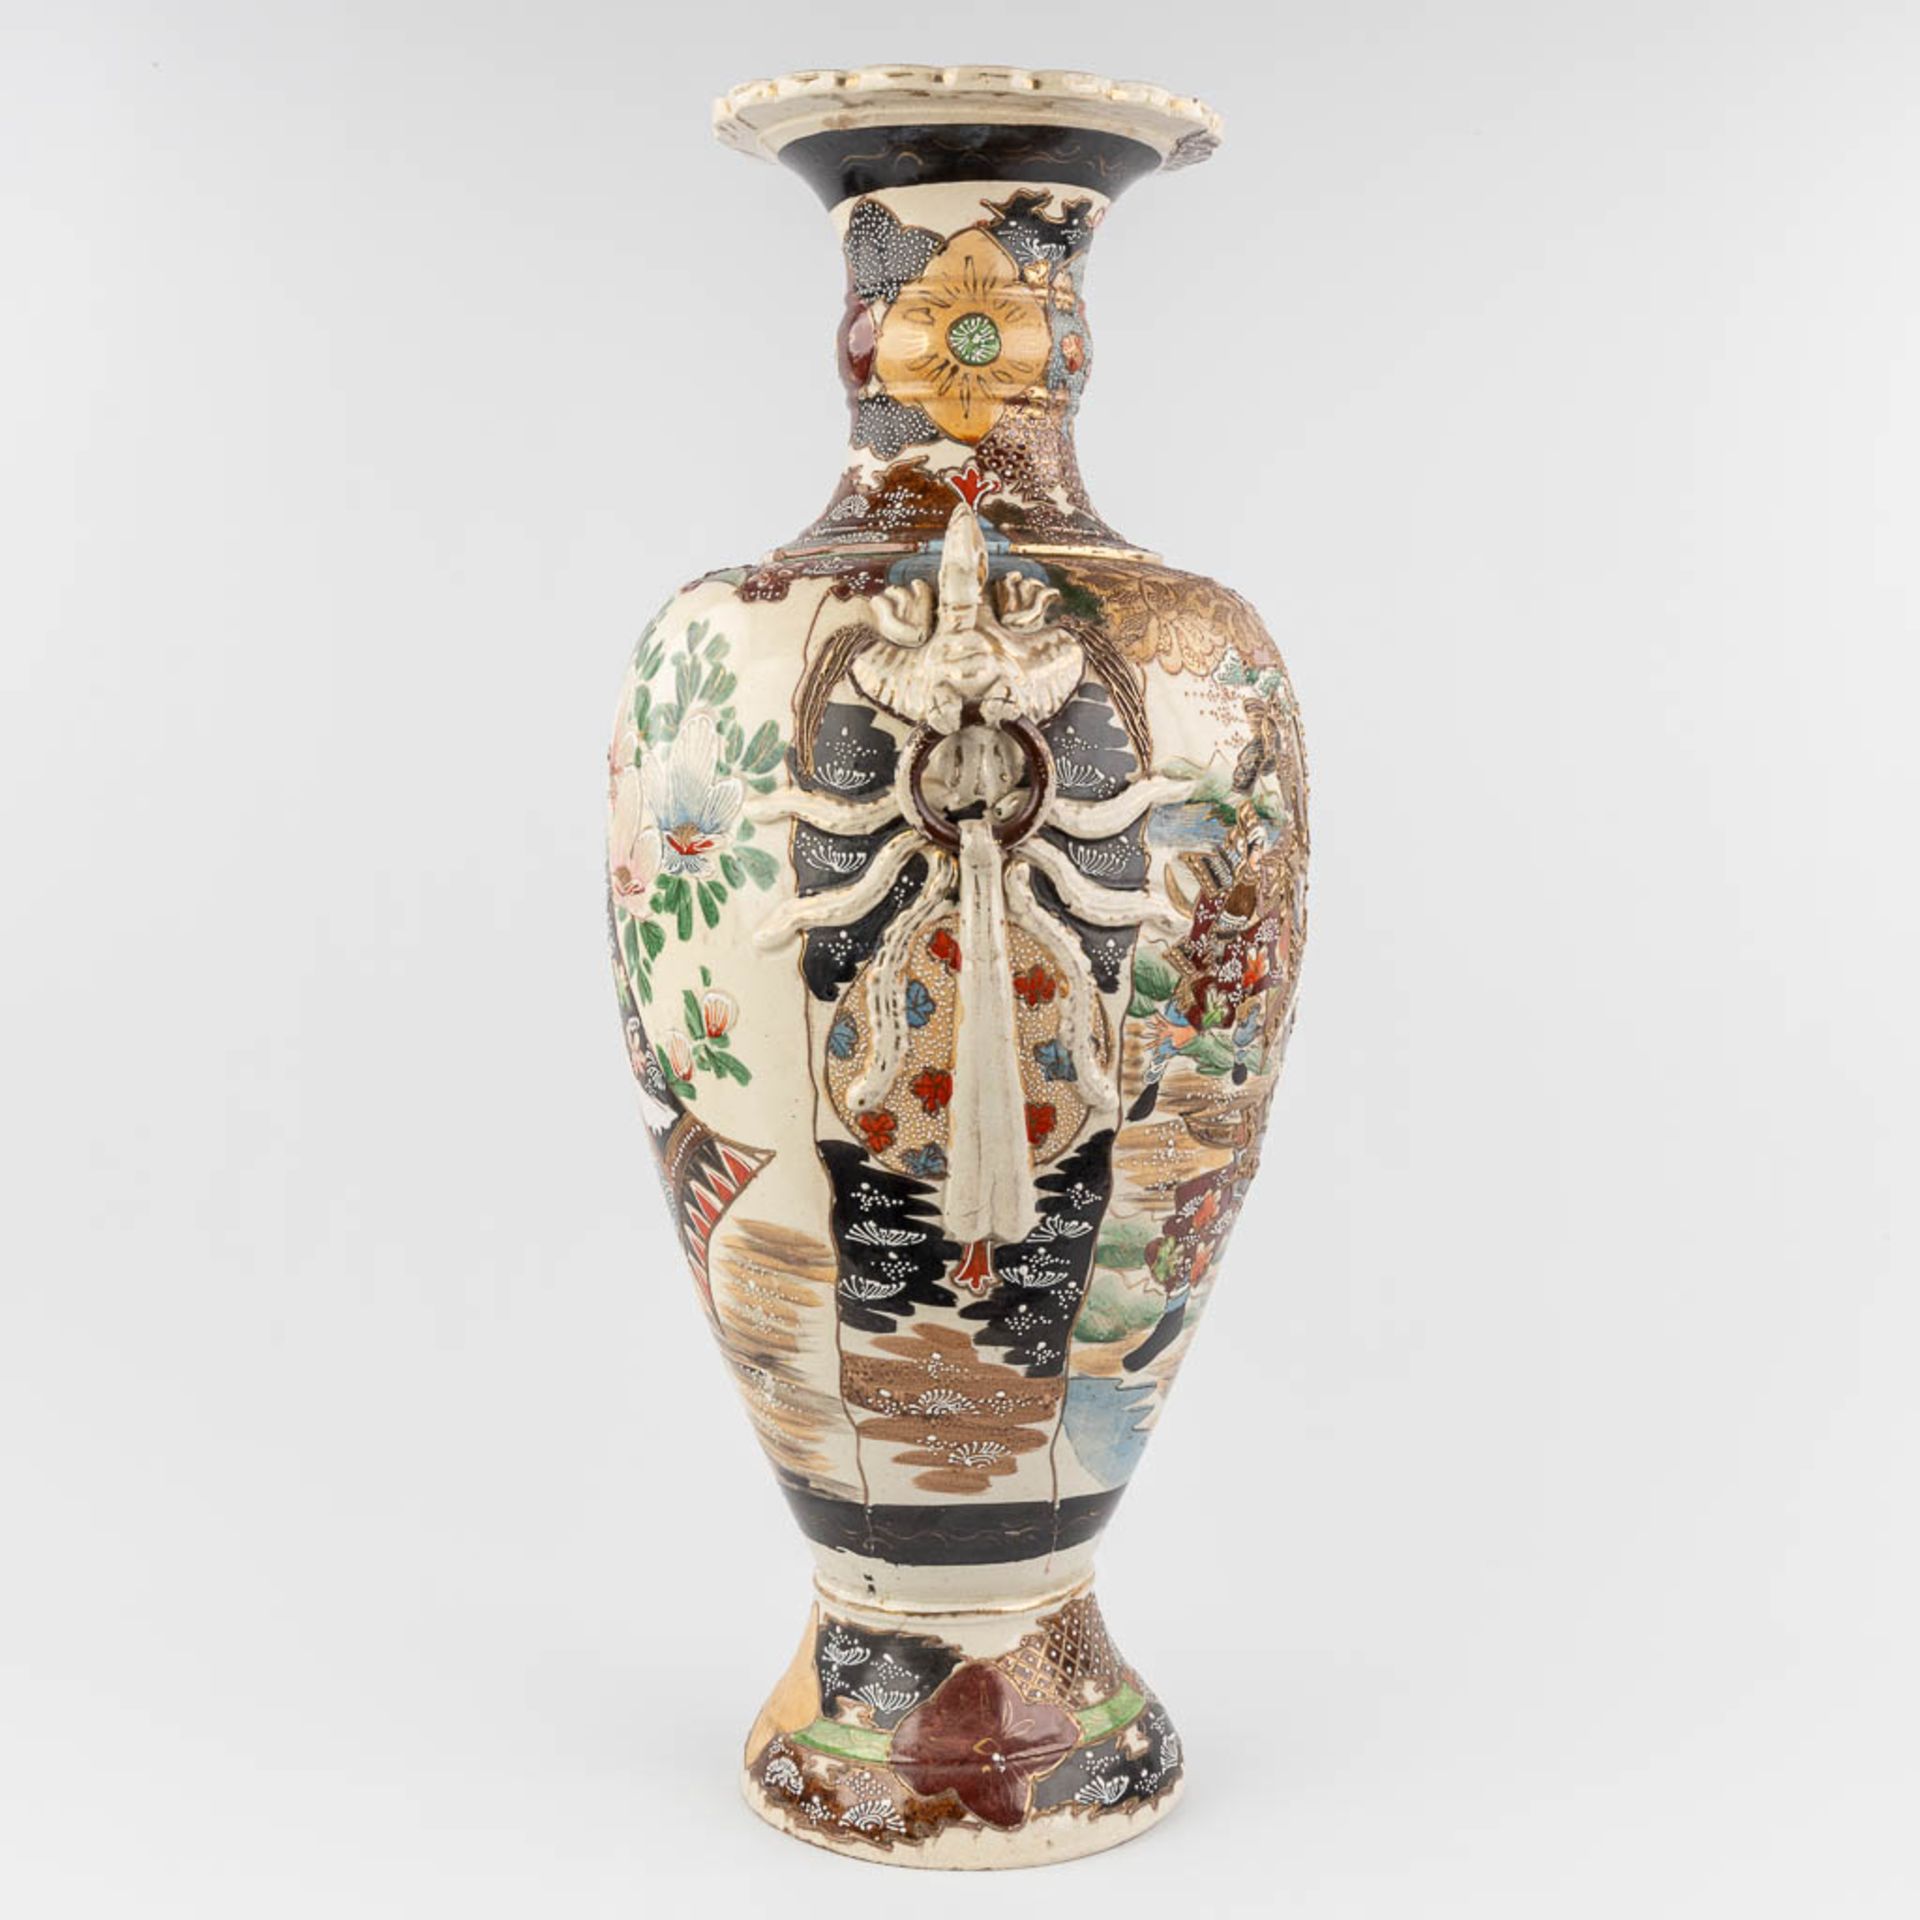 A large and decorative Japanese Satsuma vase. 20th C. (H:80 x D:32 cm) - Image 4 of 16